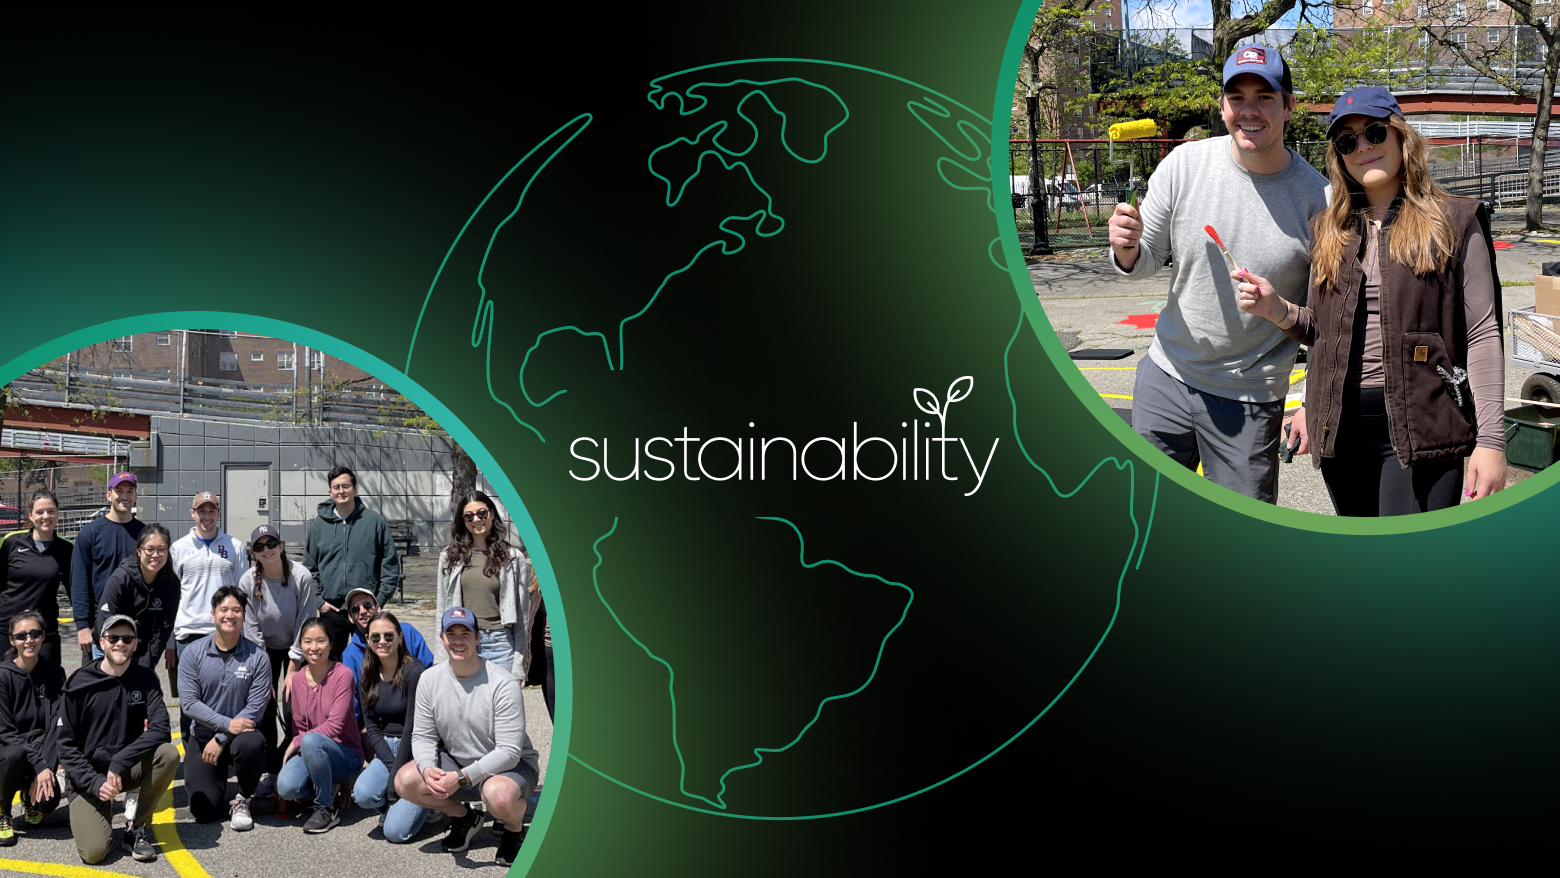 Black background with green globe with "sustainability" in text. Includes photos of Yext employees at Sustainability ERG functions.